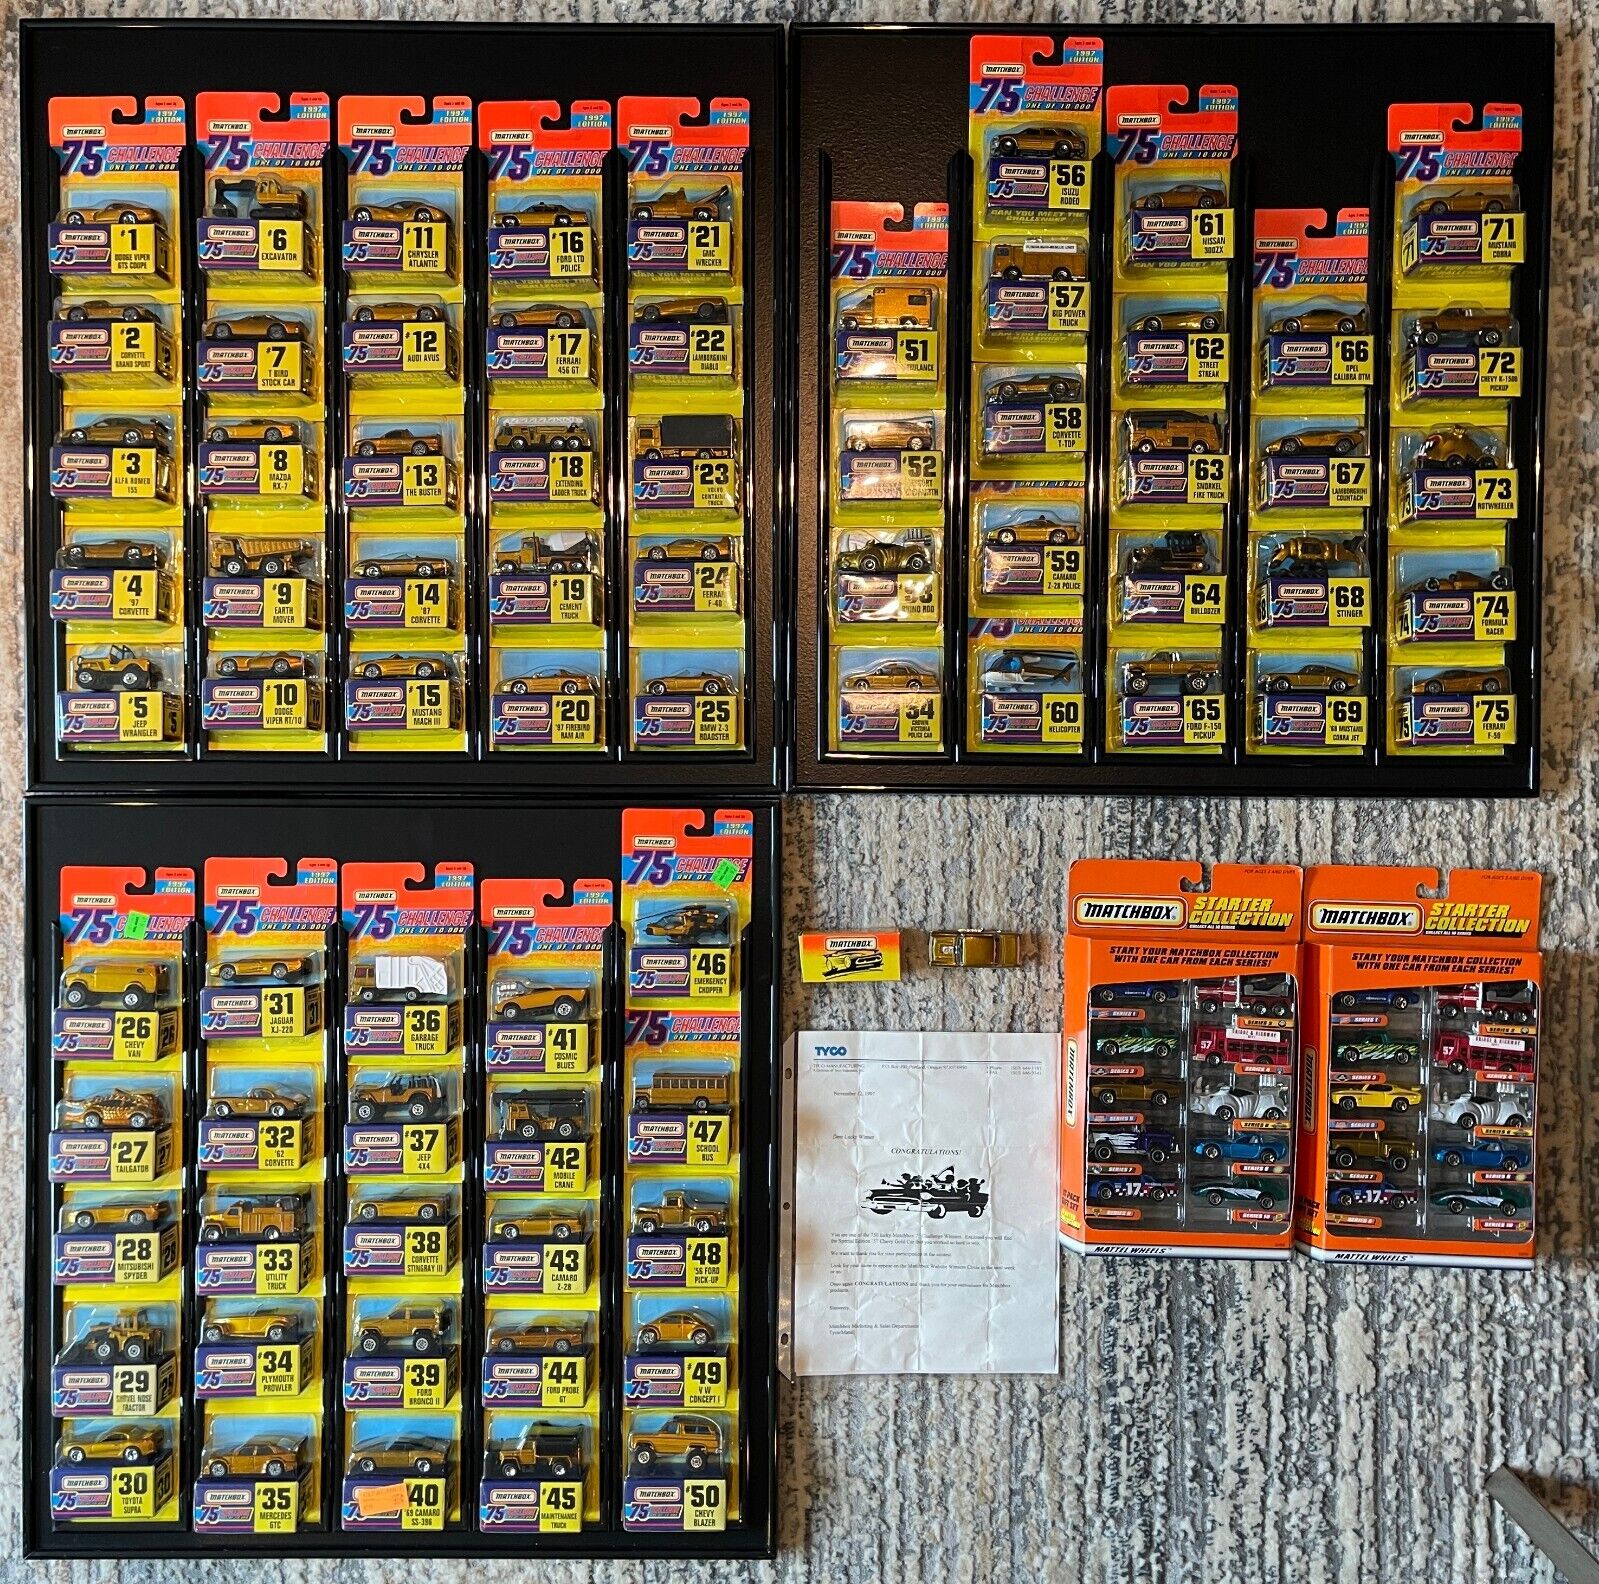 MATCHBOX 75 Challenge 1997 GOLD COMPLETE SET 1 of 10,000 MBOC 1 of 750 \'57 Chevy